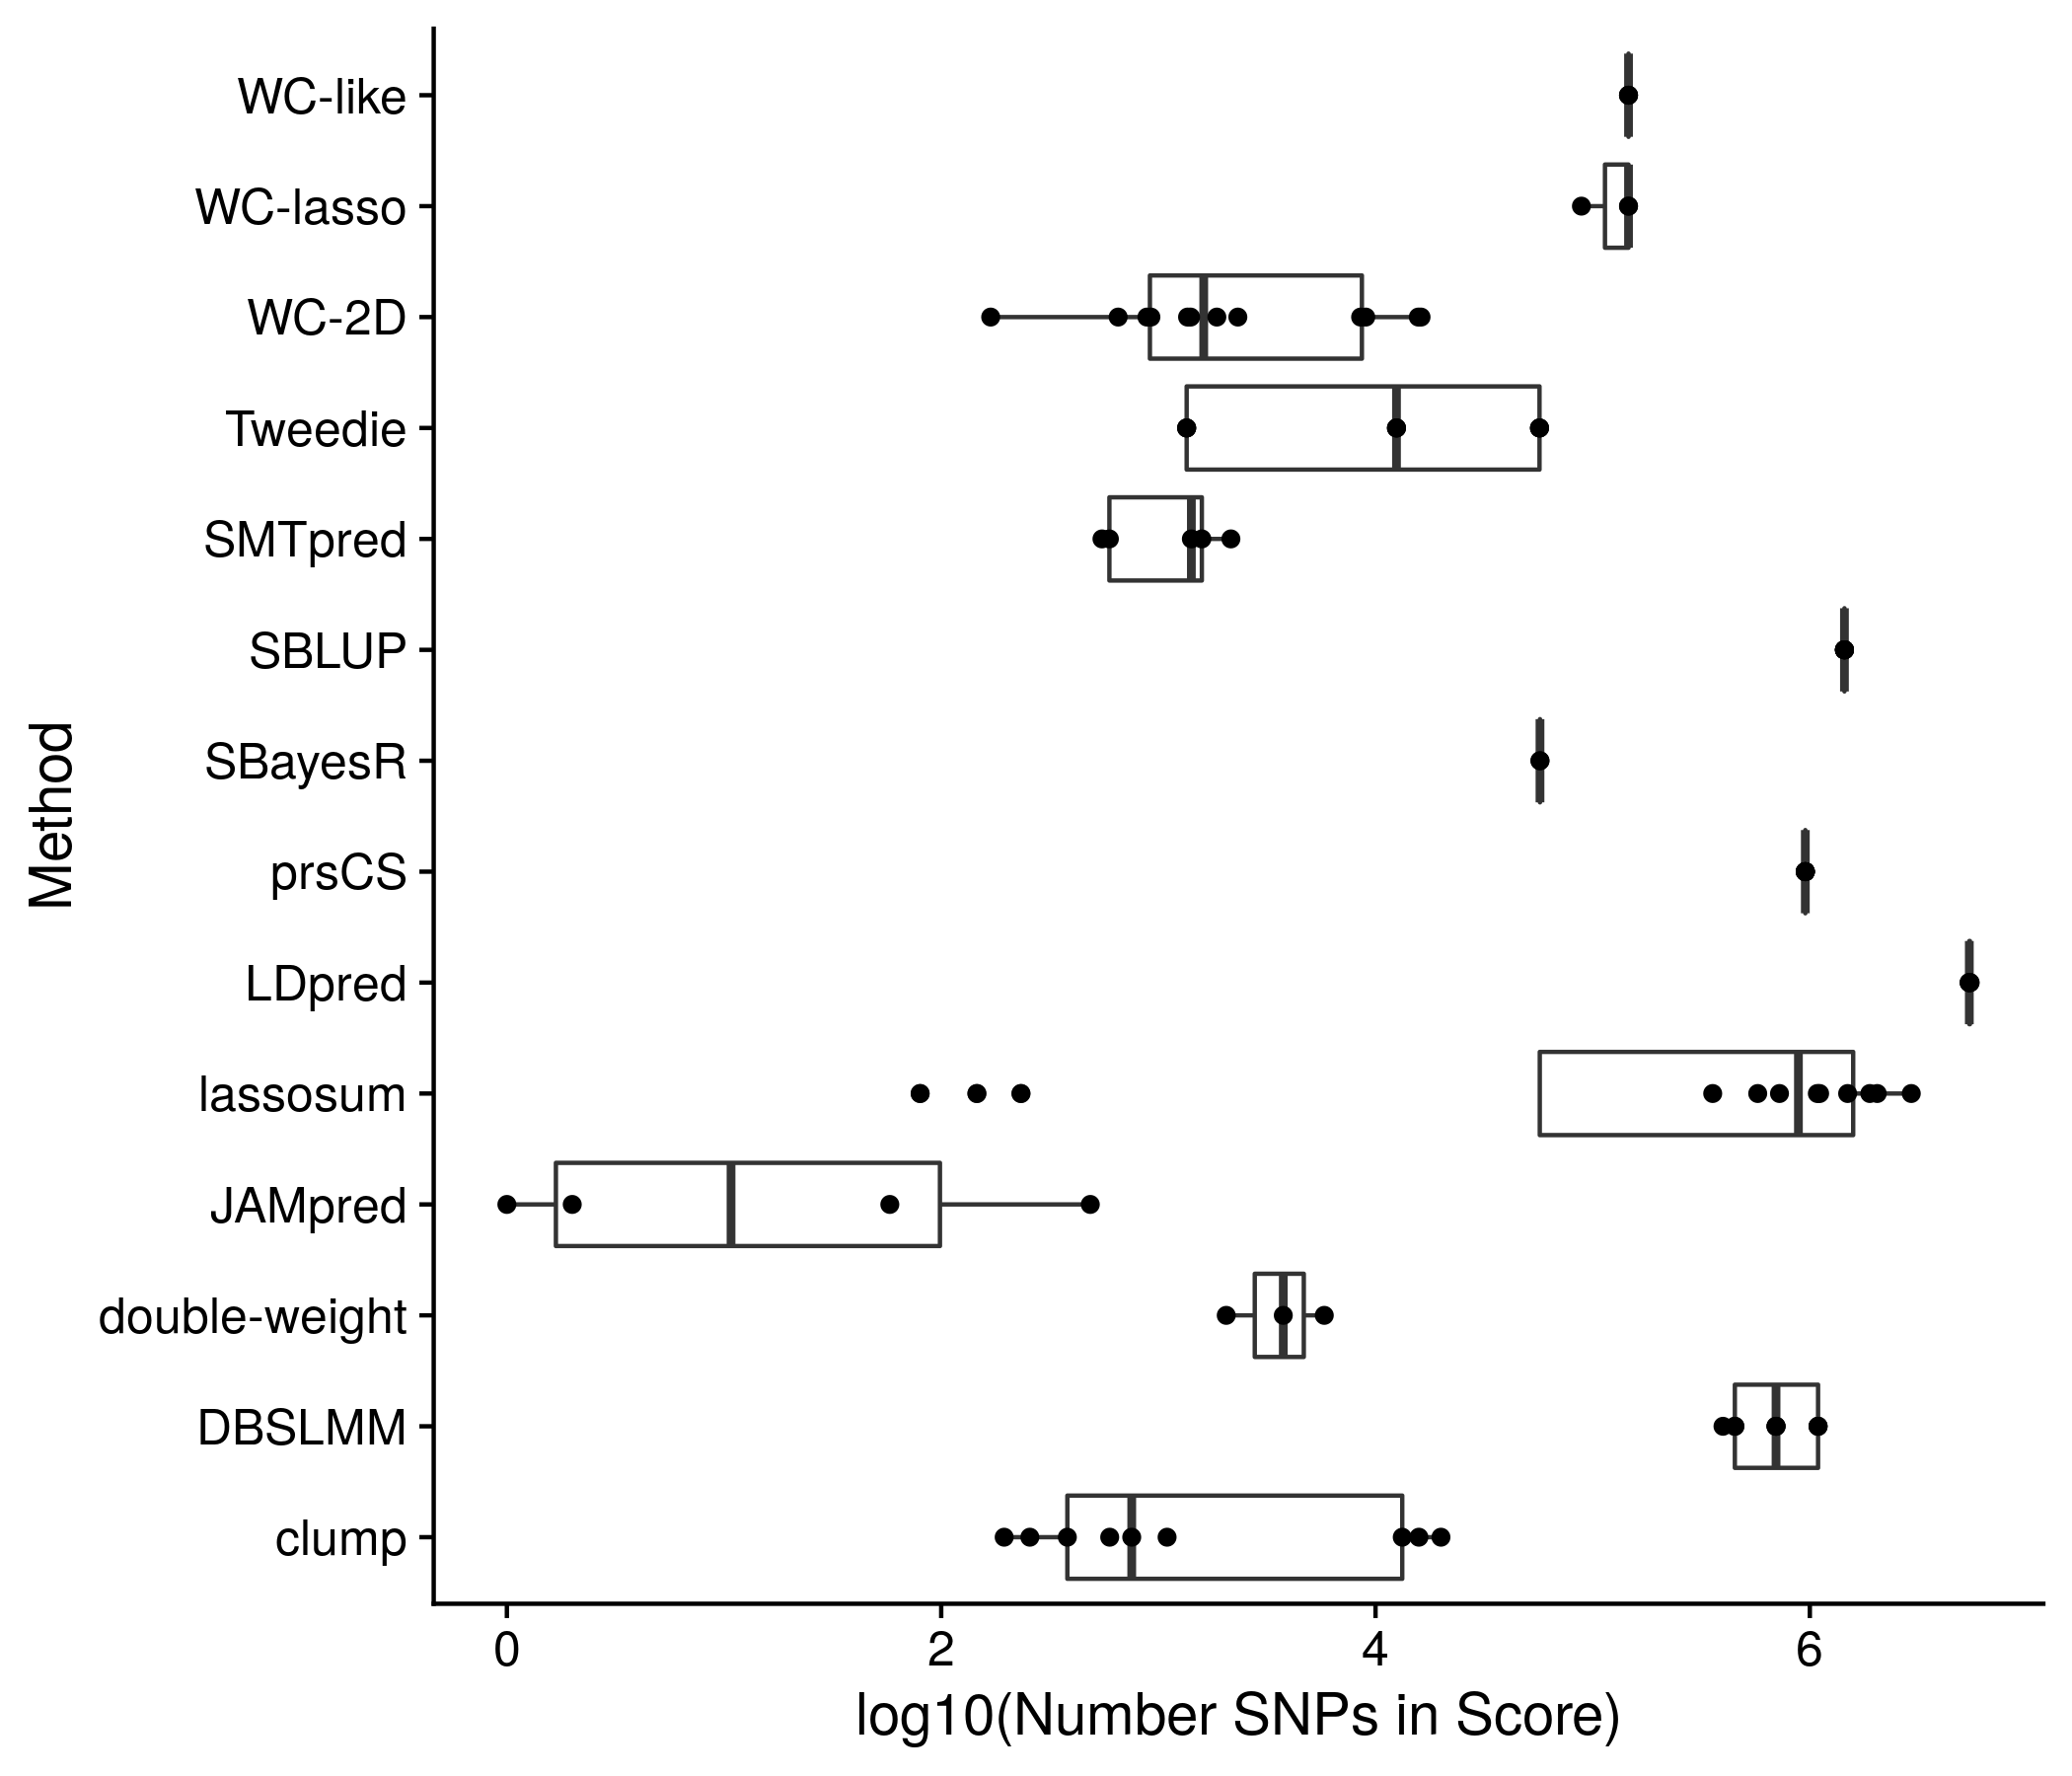 Another example plot of the score sizes